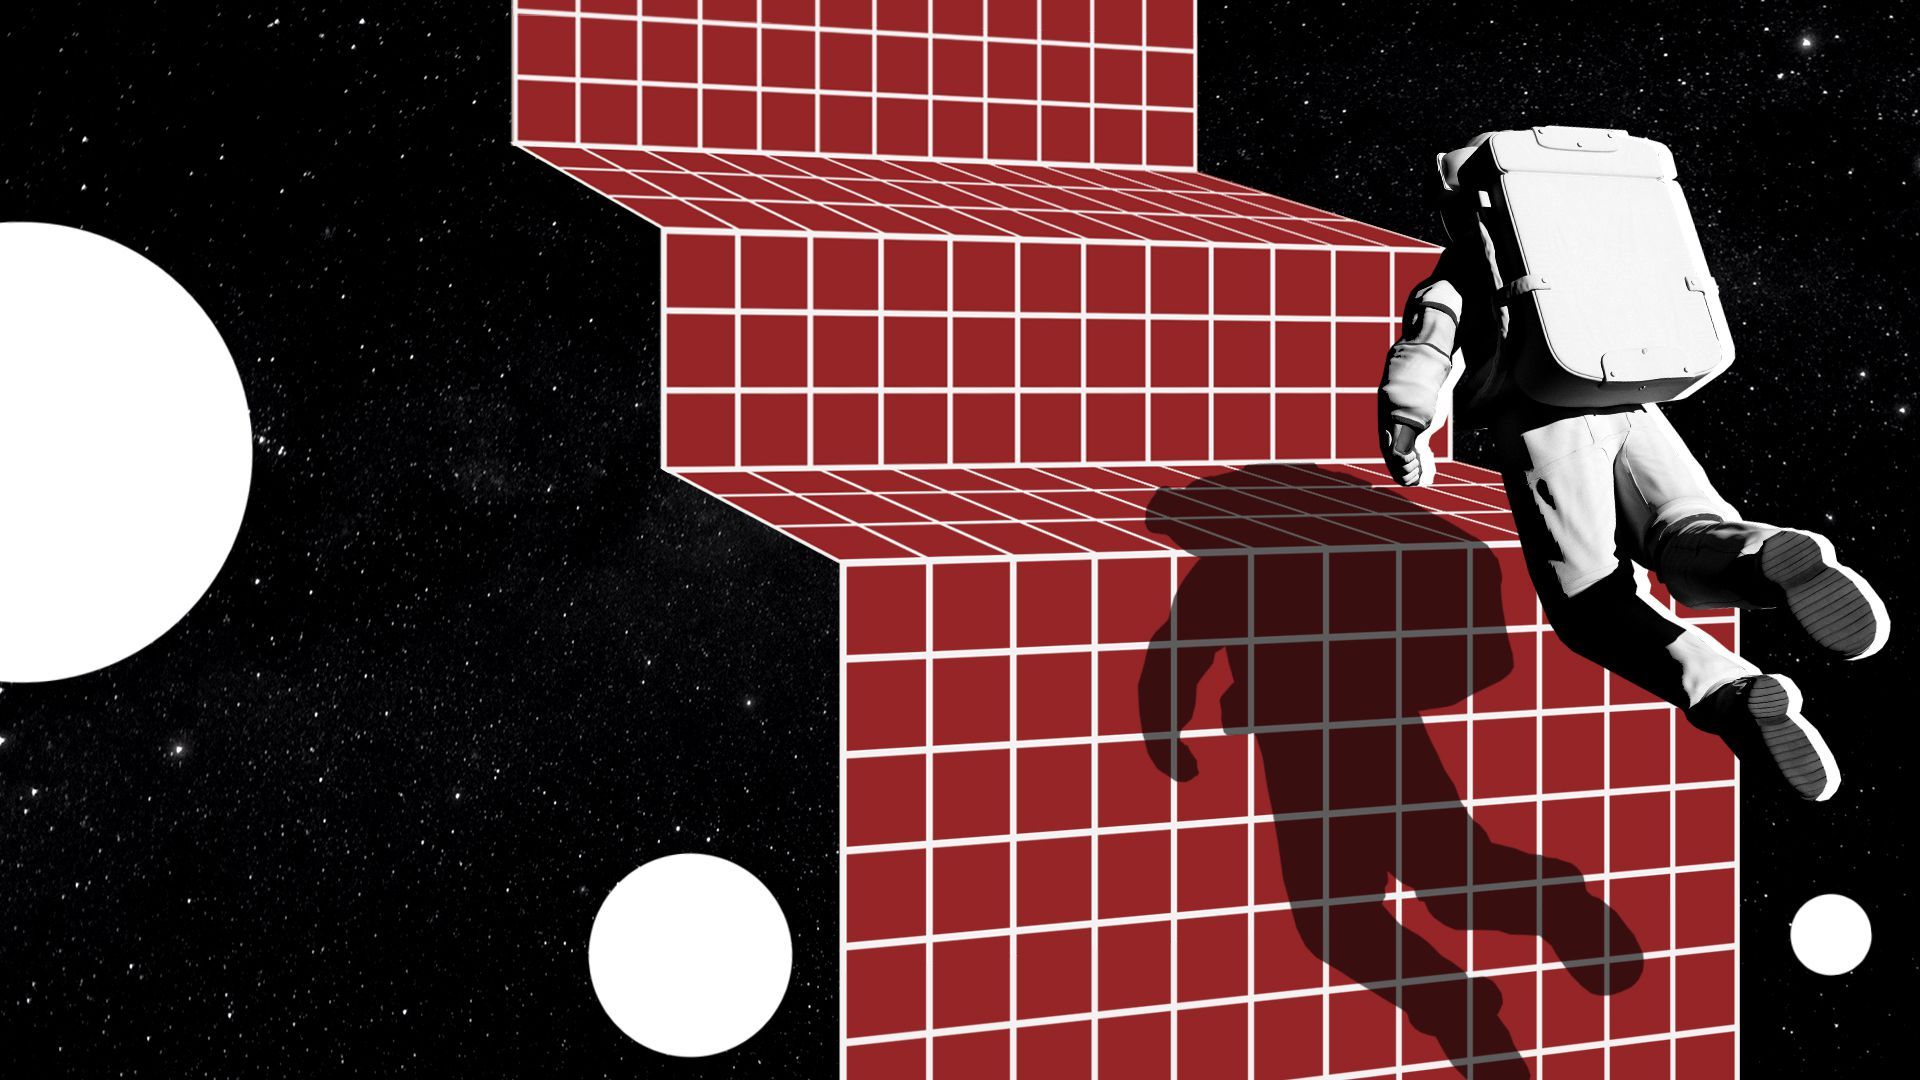 Illustration of an astronaut floating upwards over a gridded staircase 